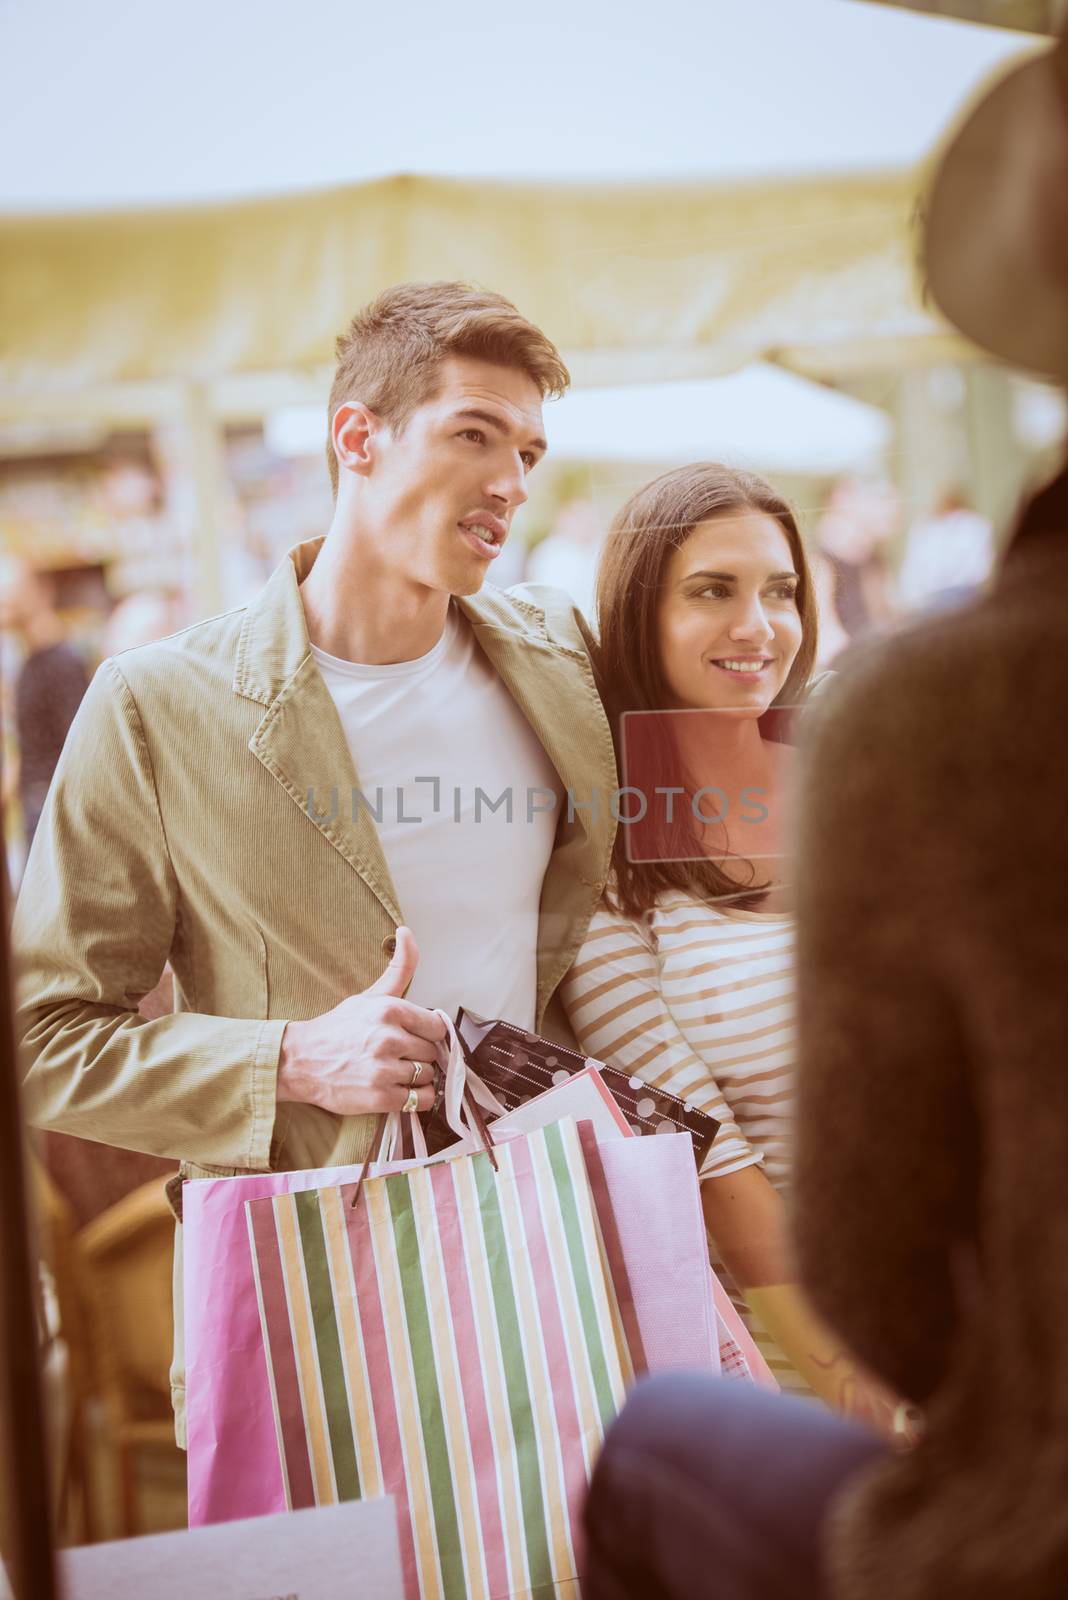 Couple In Shopping by MilanMarkovic78